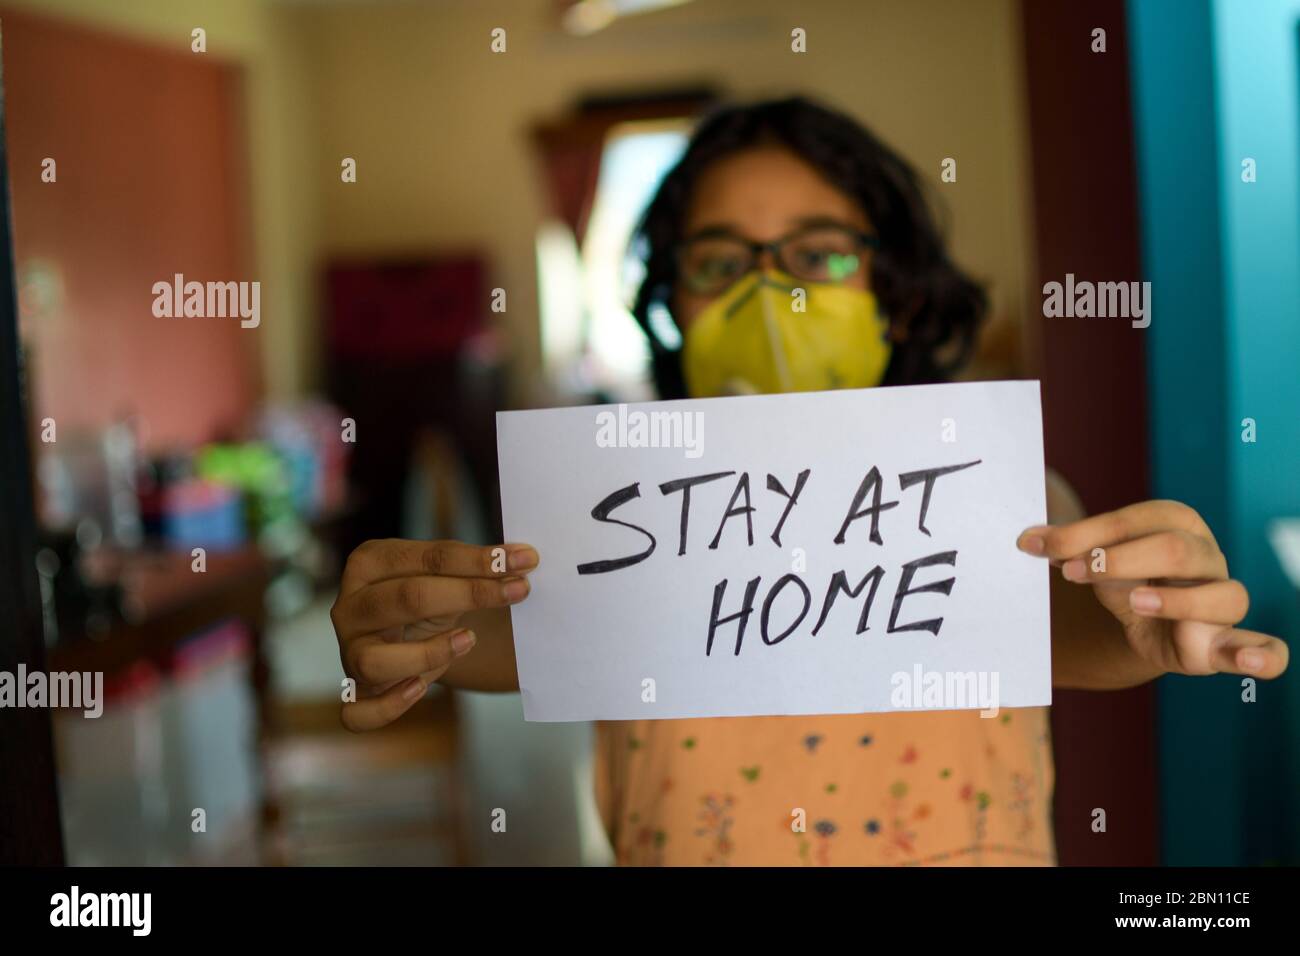 Little Indian girl wearing face mask holds a placard in hands showing a message 'Stay at Home' during COVID-19 pandemic to maintain social distancing. Stock Photo